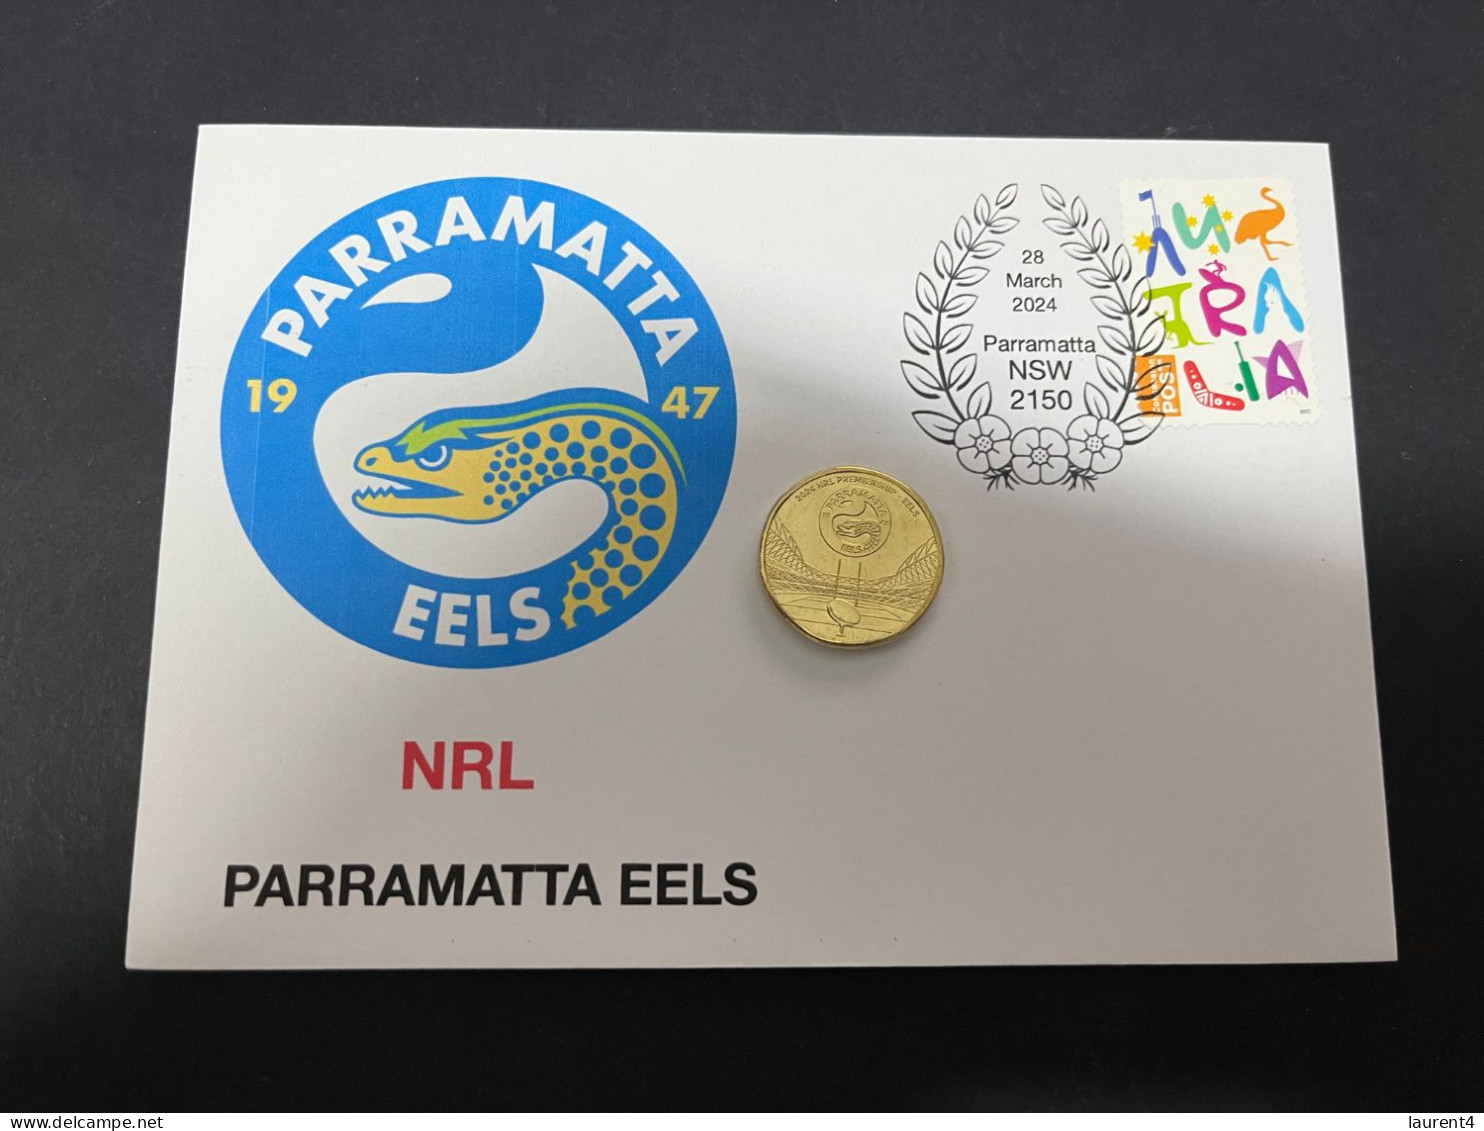 29-3-2024 (4 Y 23) Australian New $ 1.00 Coin (NRL Parramatta Eels) Released 28-3-2024 (1 X Coin On Cover) - Dollar